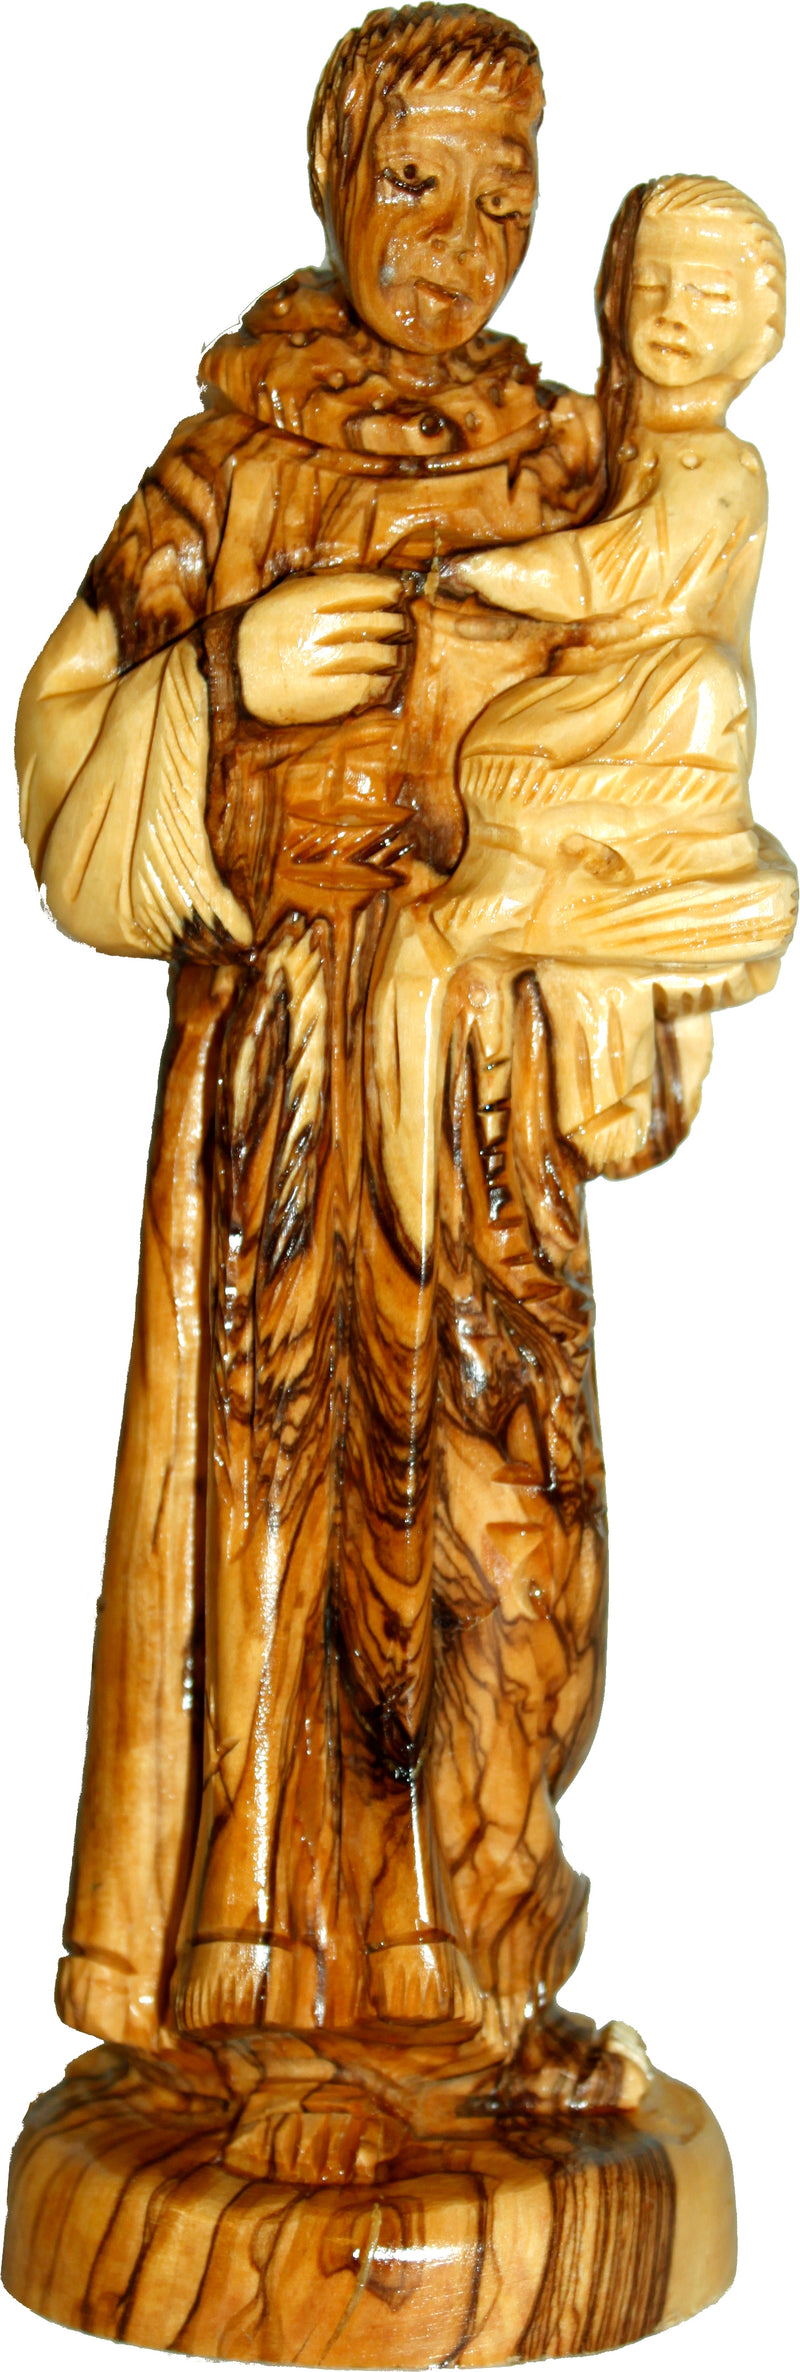 Holy Land Market Saint Anthony Carved in Olive Wood Figure Statue - 9 Inches